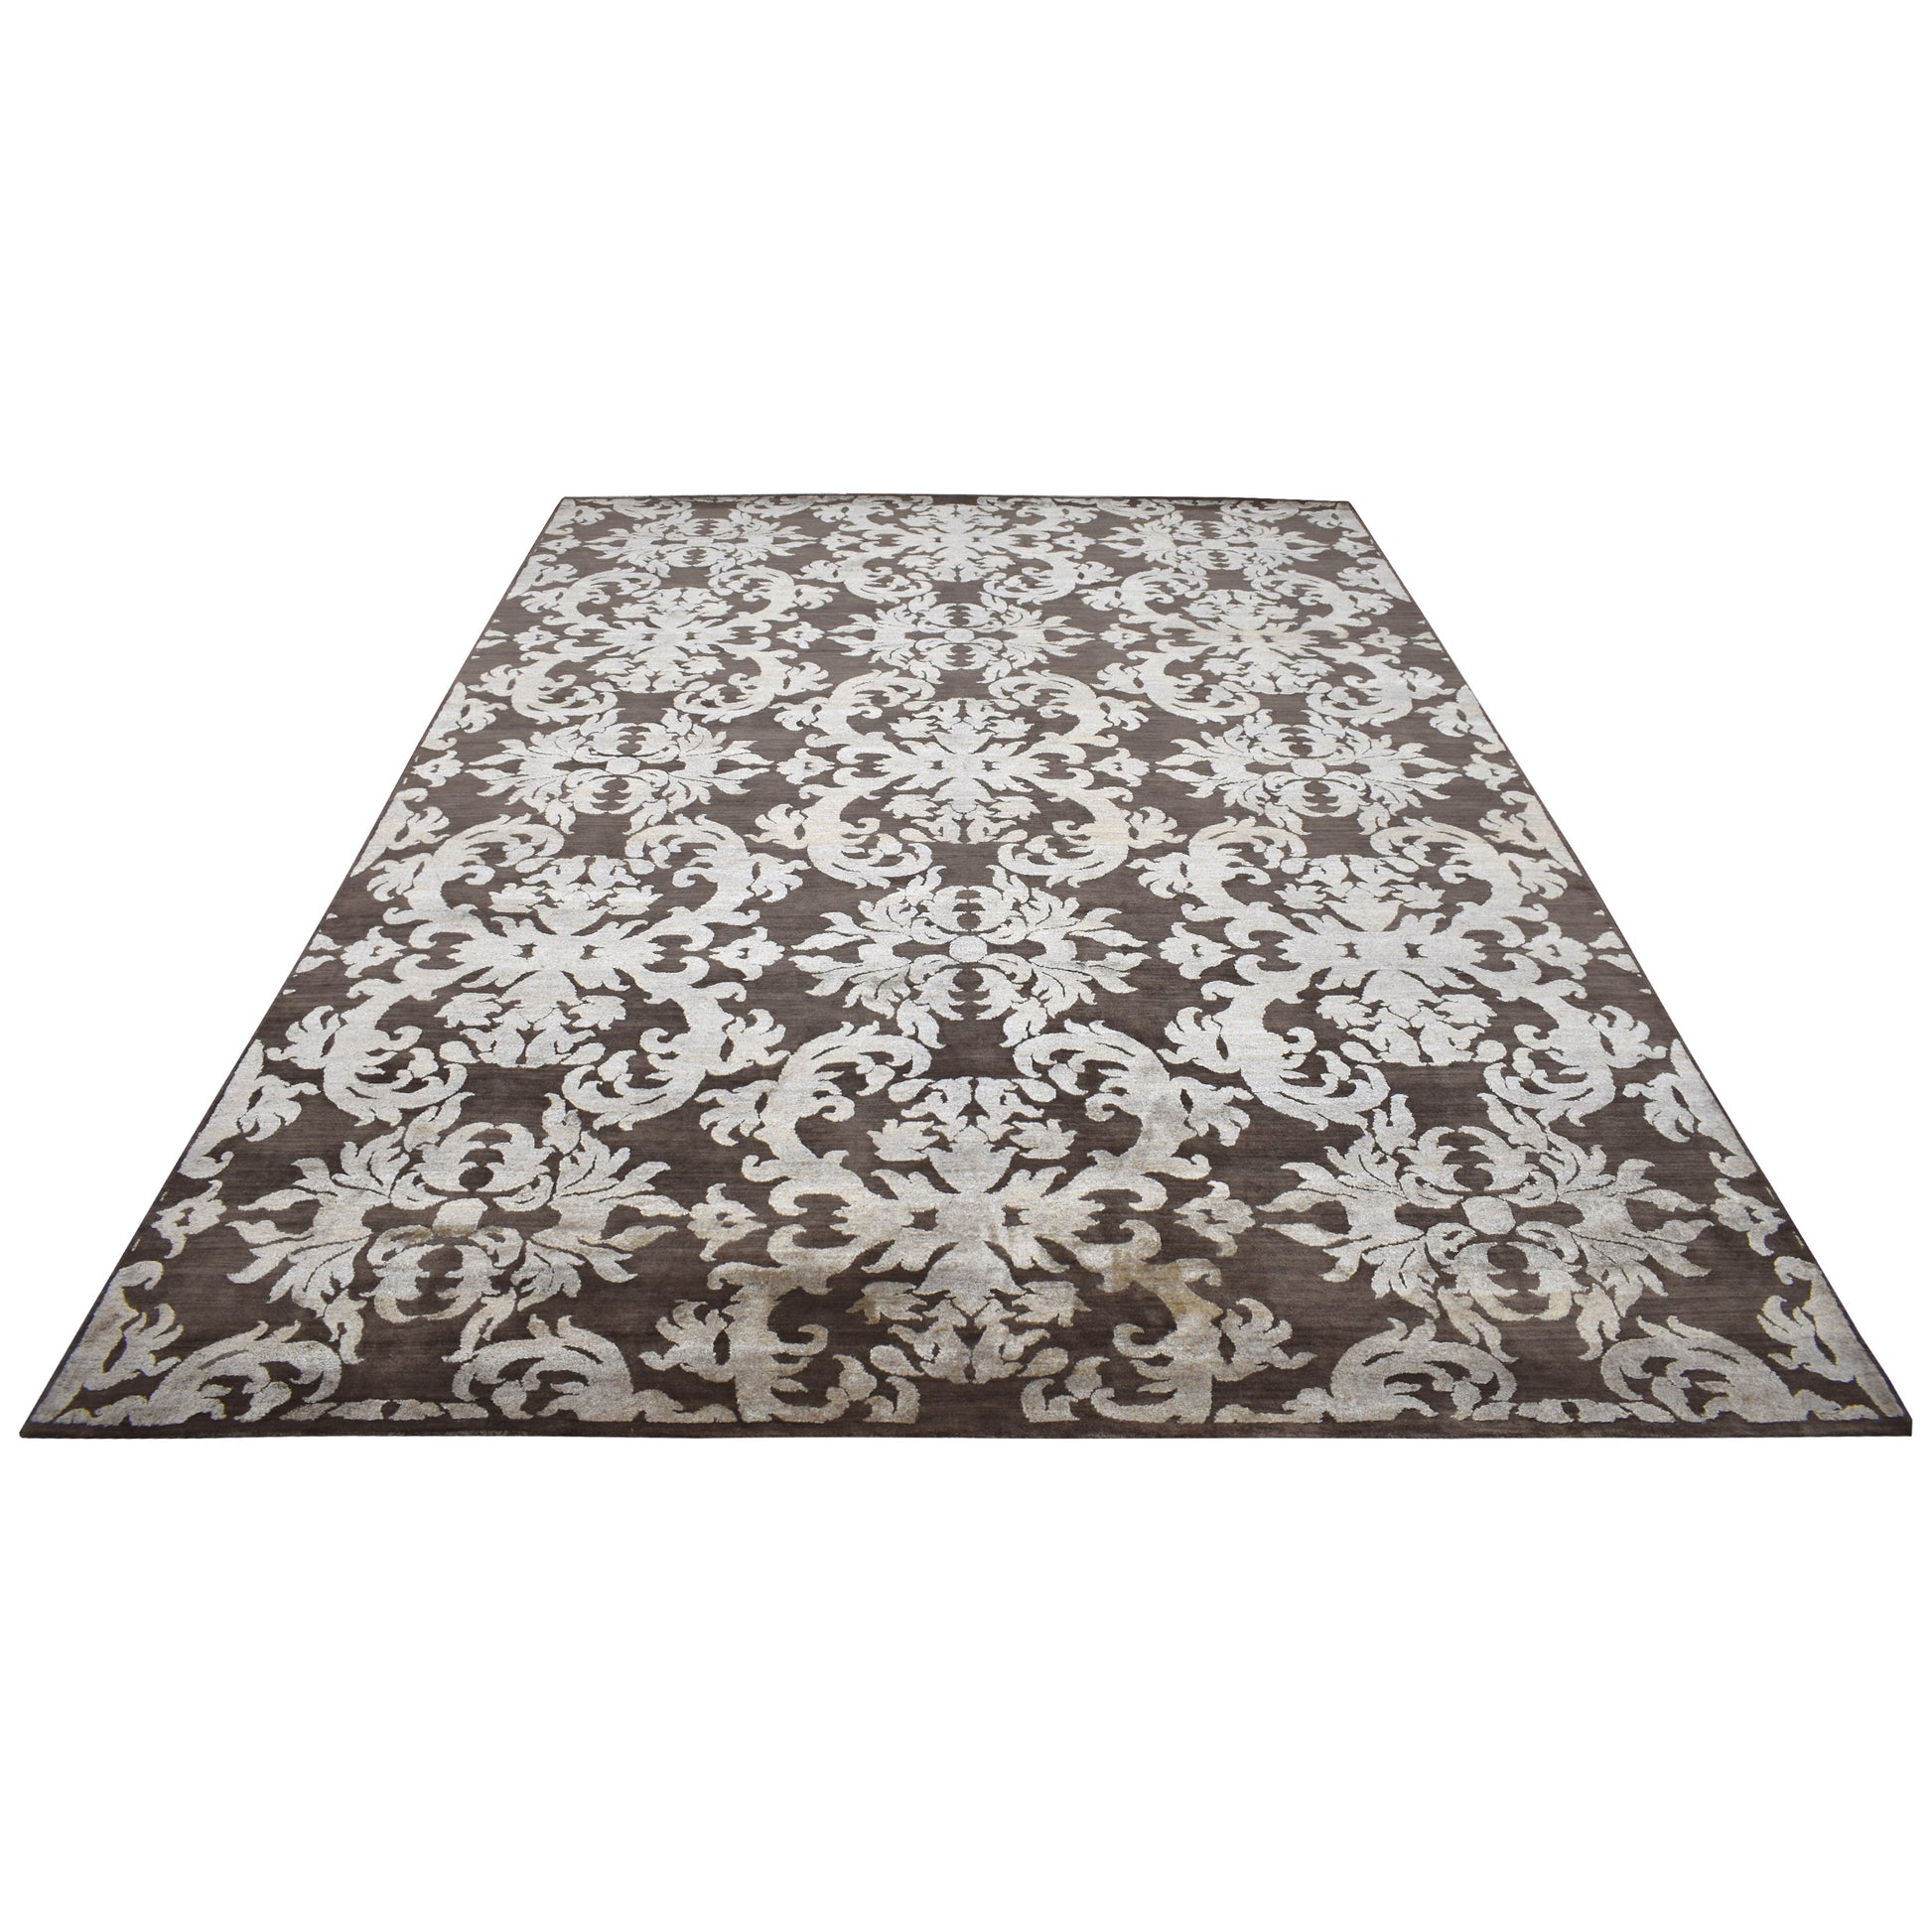 Get trendy with Lisbon Damask Brown and Ivory Transitional Silk and Wool Handknotted Area Rug - Transitional Rugs available at Jaipur Oriental Rugs. Grab yours for $5940.00 today!